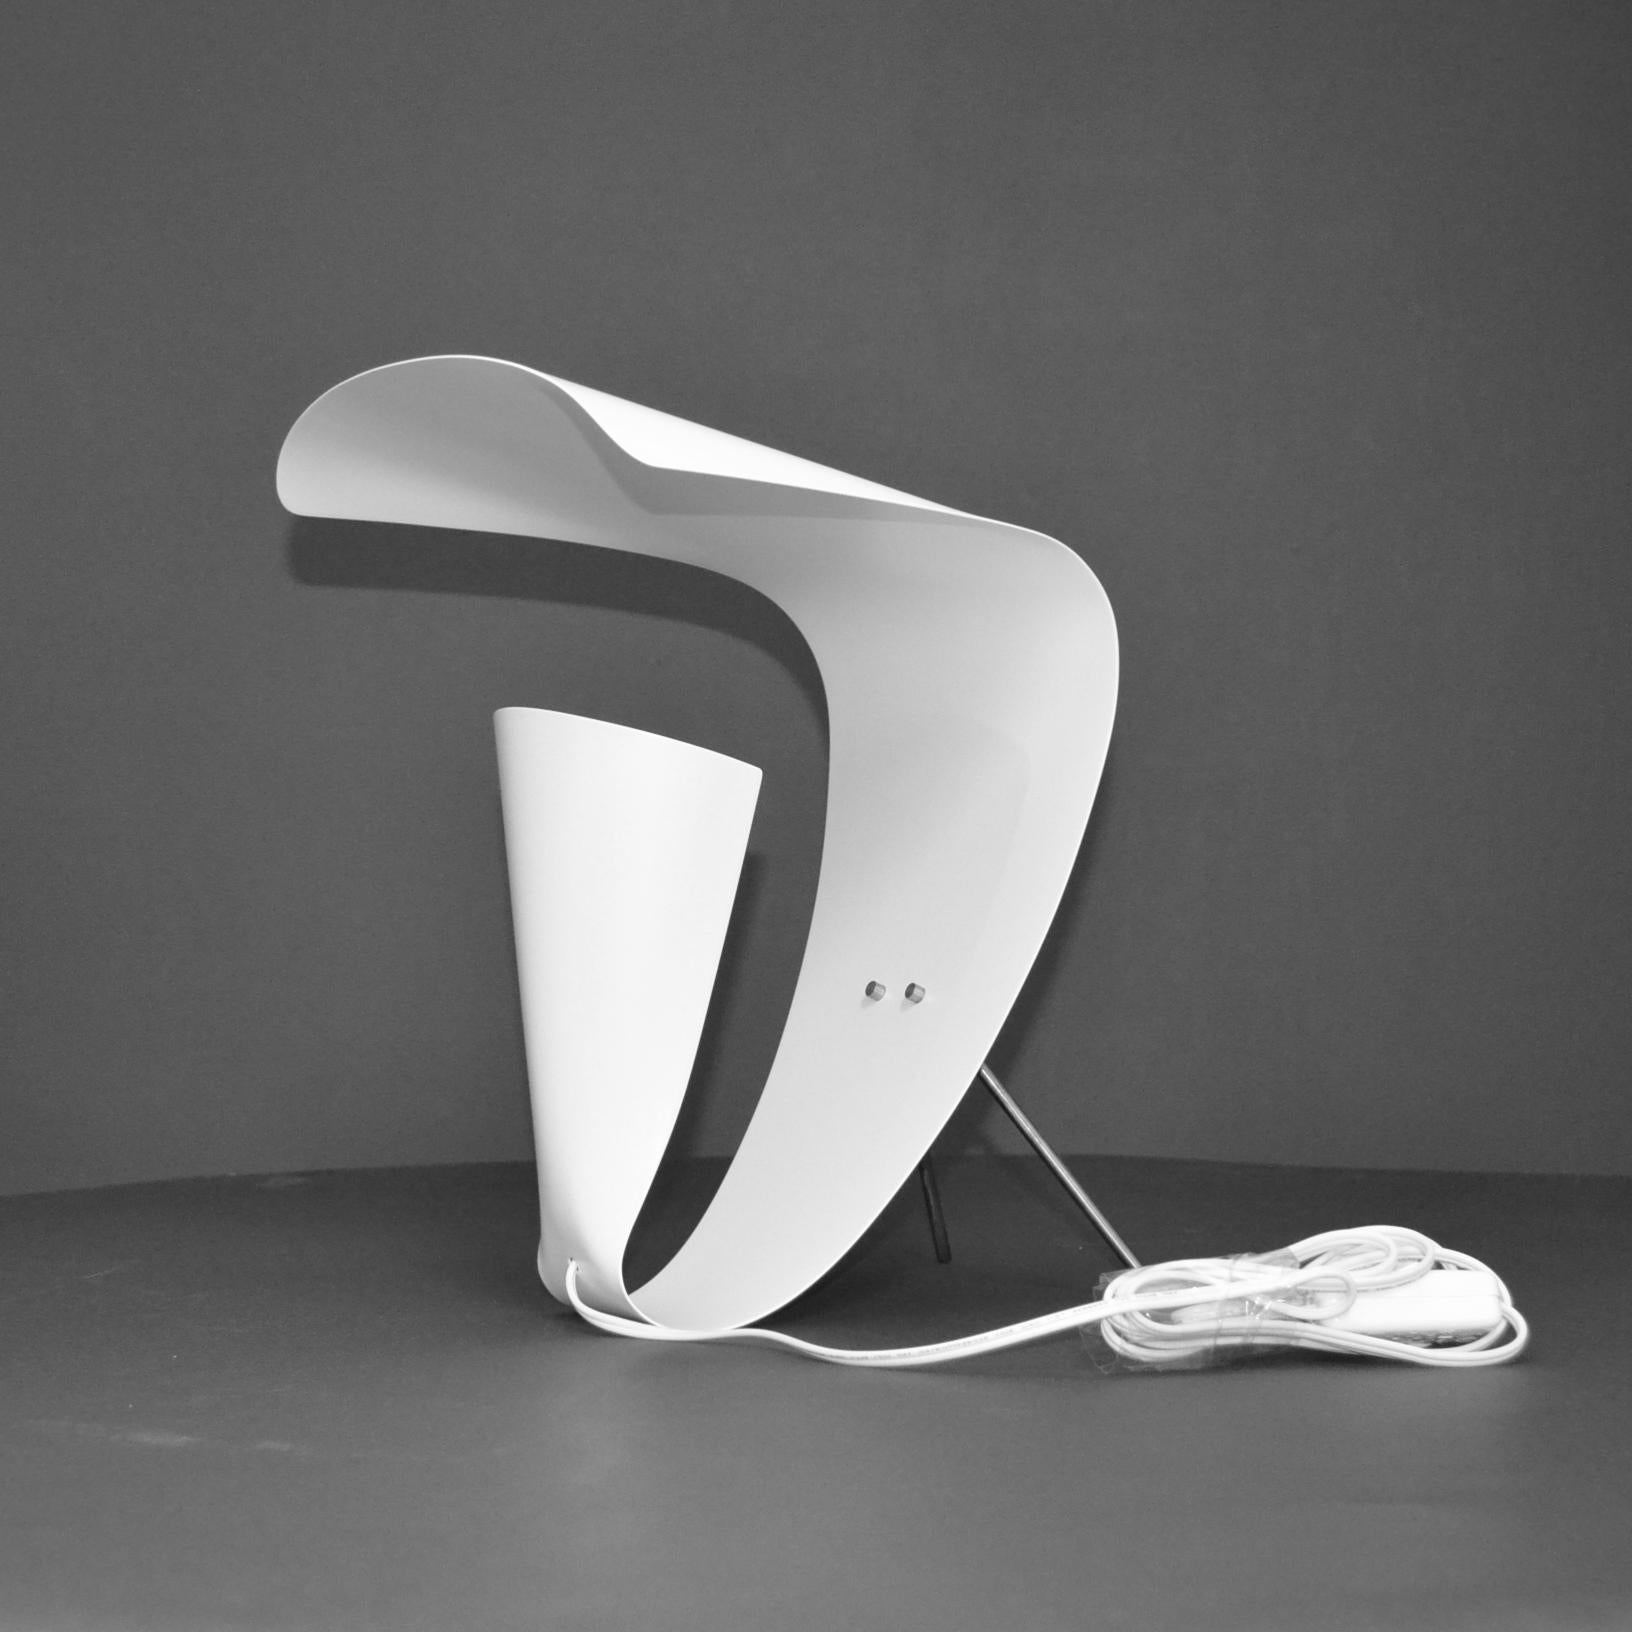 French Michel Buffet - White Curved Desk Lamp B201 - IN STOCK! For Sale